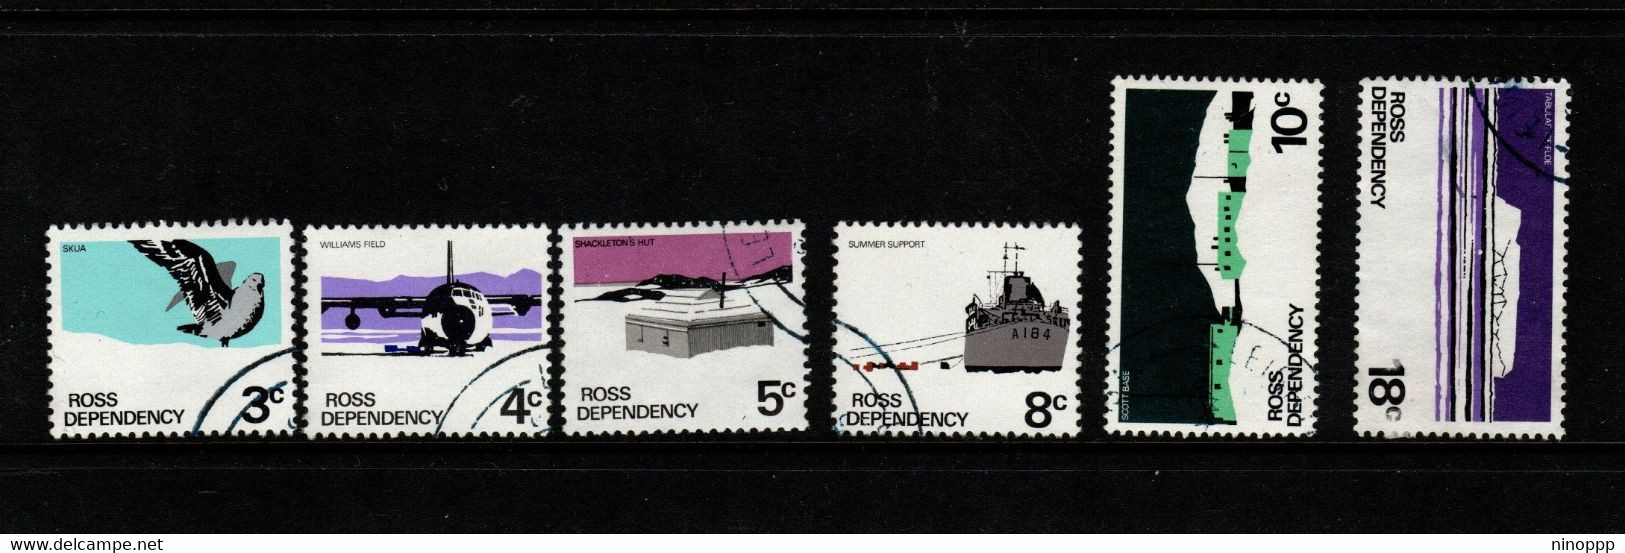 Ross Dependency SG 9-14 1972 Definitives,used - Used Stamps